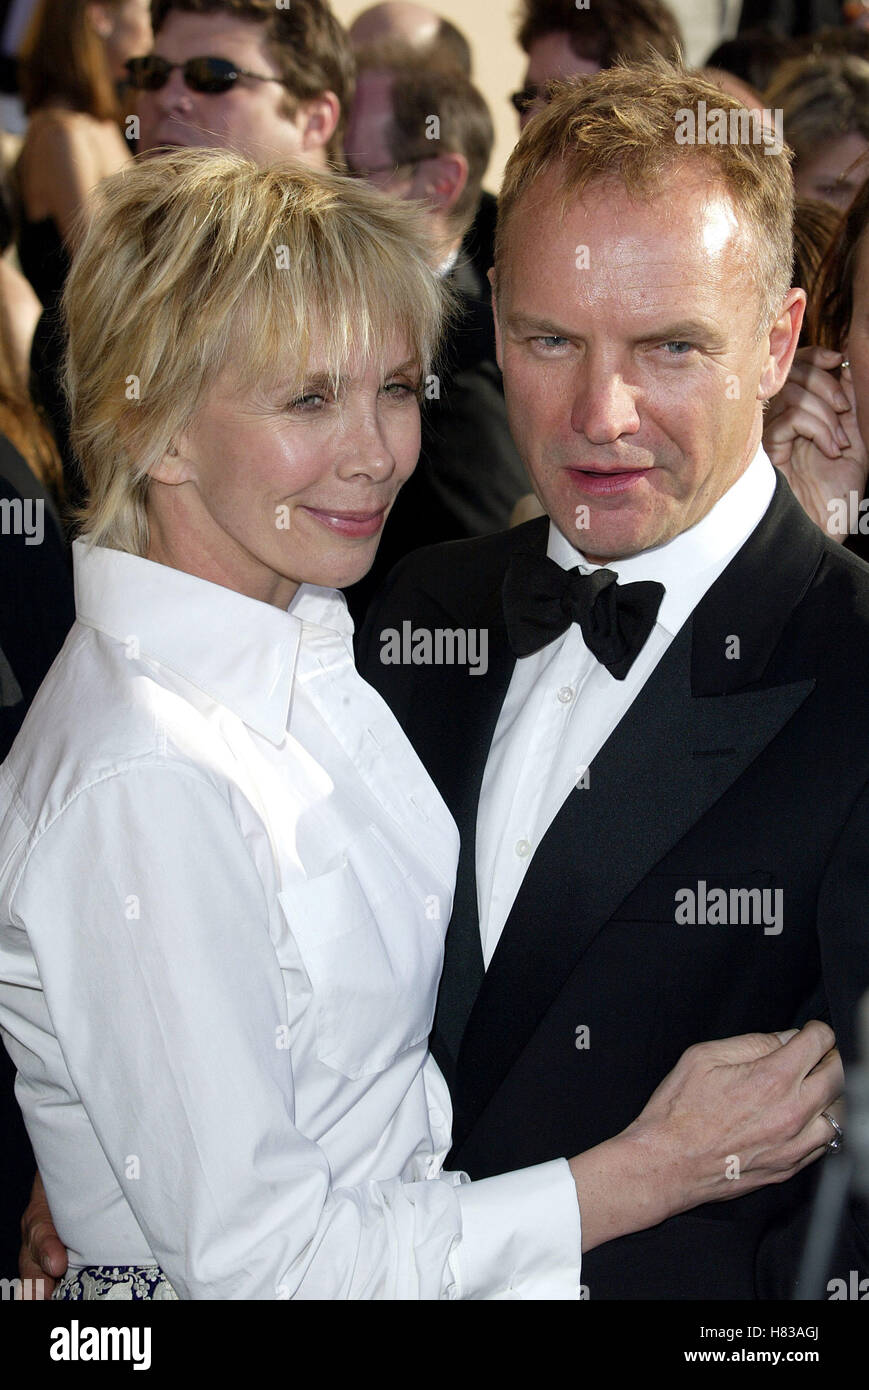 STING & TRUDIE STYLER 8TH SCREEN ACTORS GUILD AWARDS ARRIVALS SHRINE AUDITORIUM LOS ANGELES USA 10 March 2002 Stock Photo